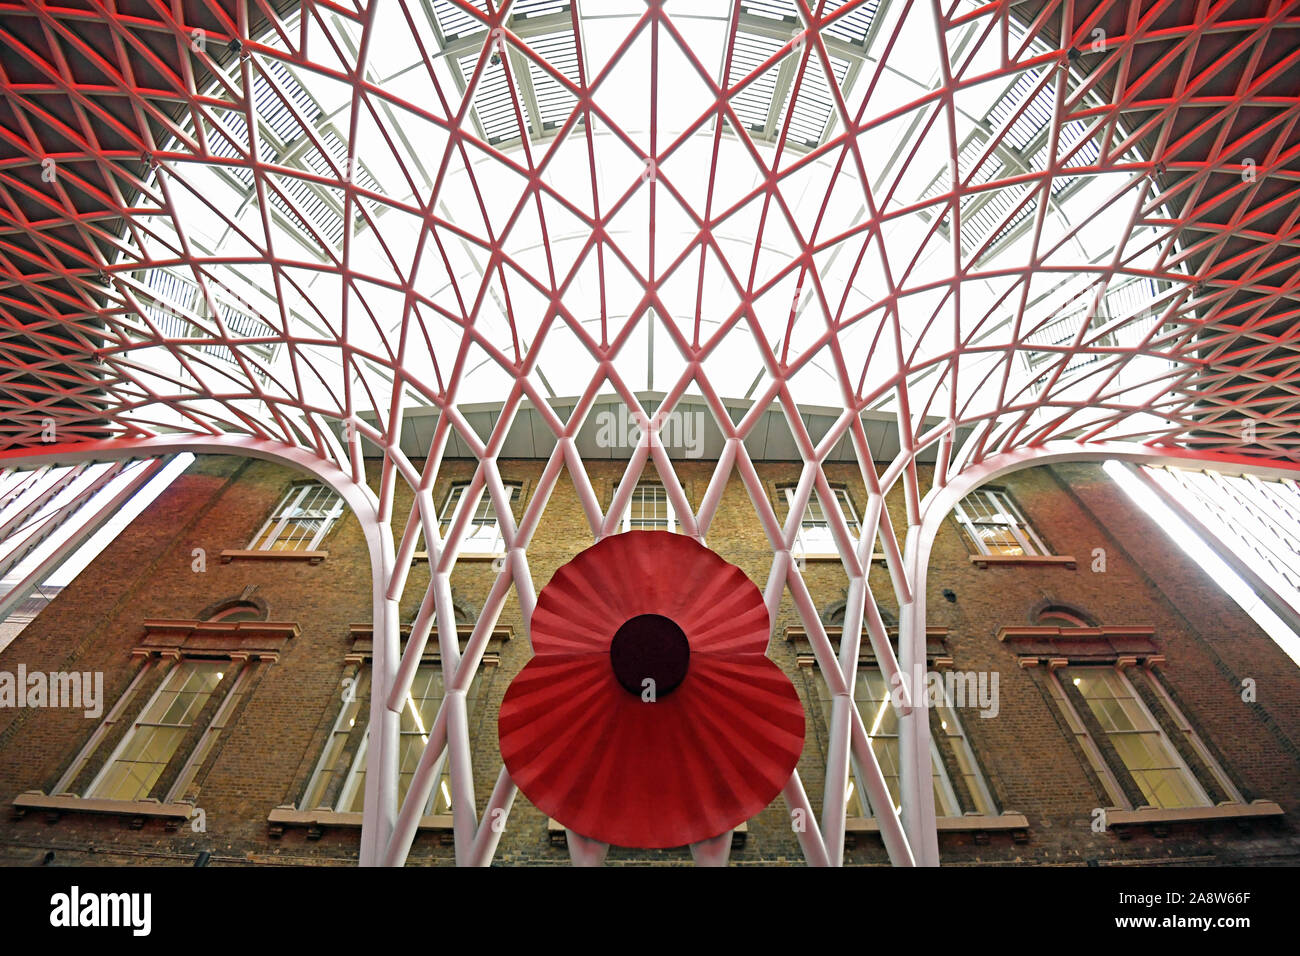 A large model of a poppy over King's Cross St. Pancras Station in London, as people gather to observe a silence to mark Armistice Day, the anniversary of the end of the First World War. Stock Photo